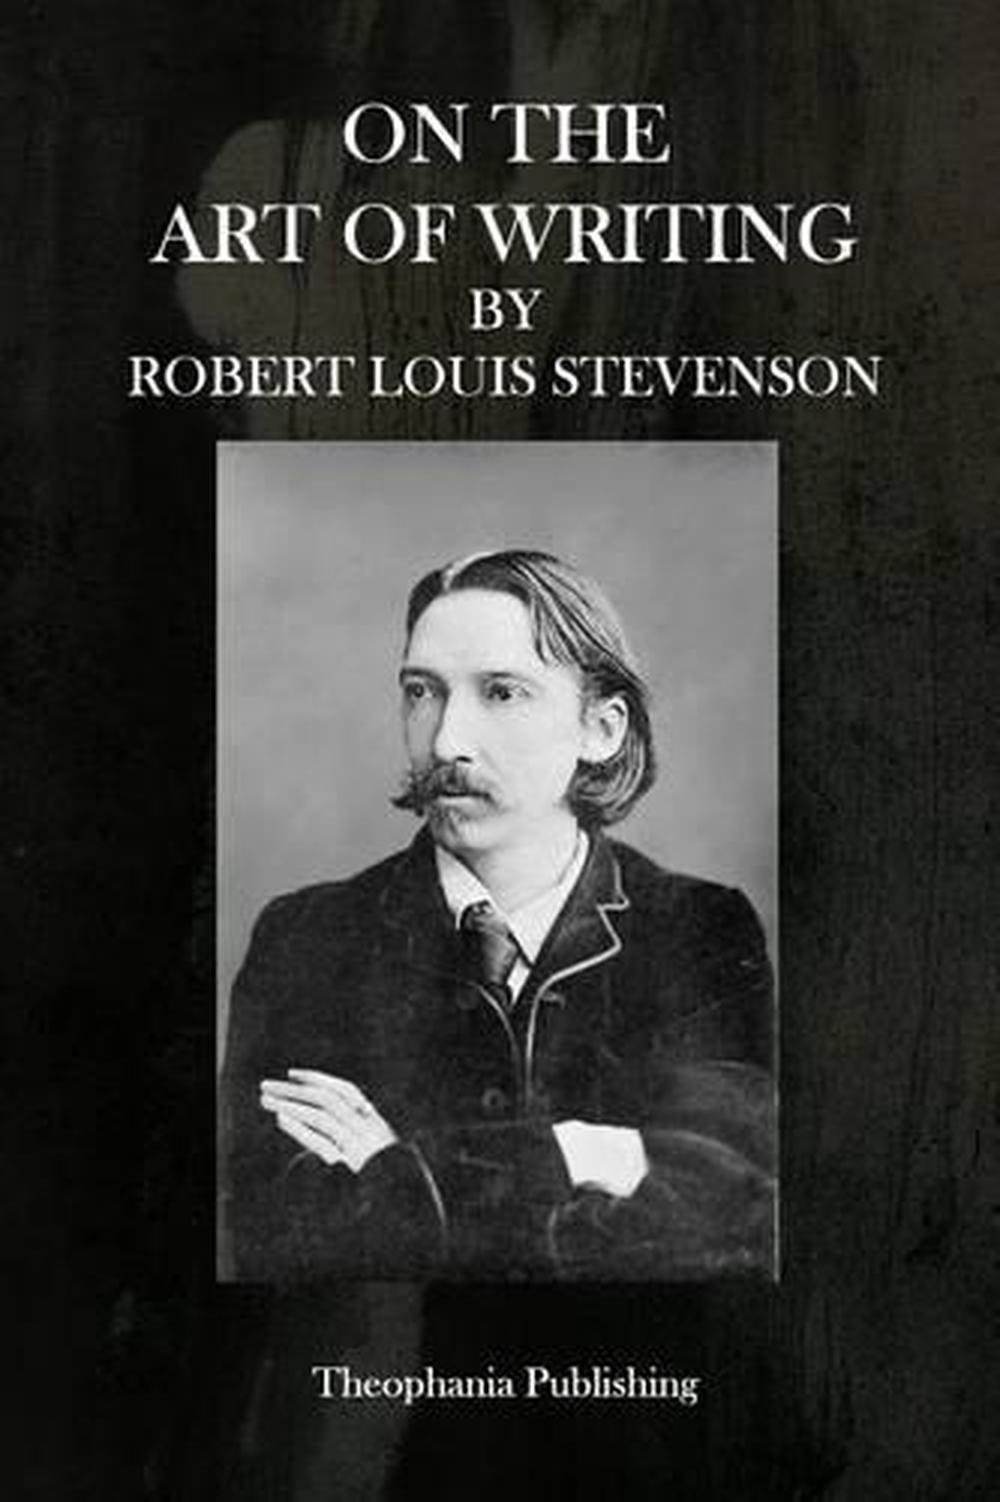 On the Art of Writing by Robert Louis Stevenson (English) Paperback Book Free Sh 9781515366041 ...